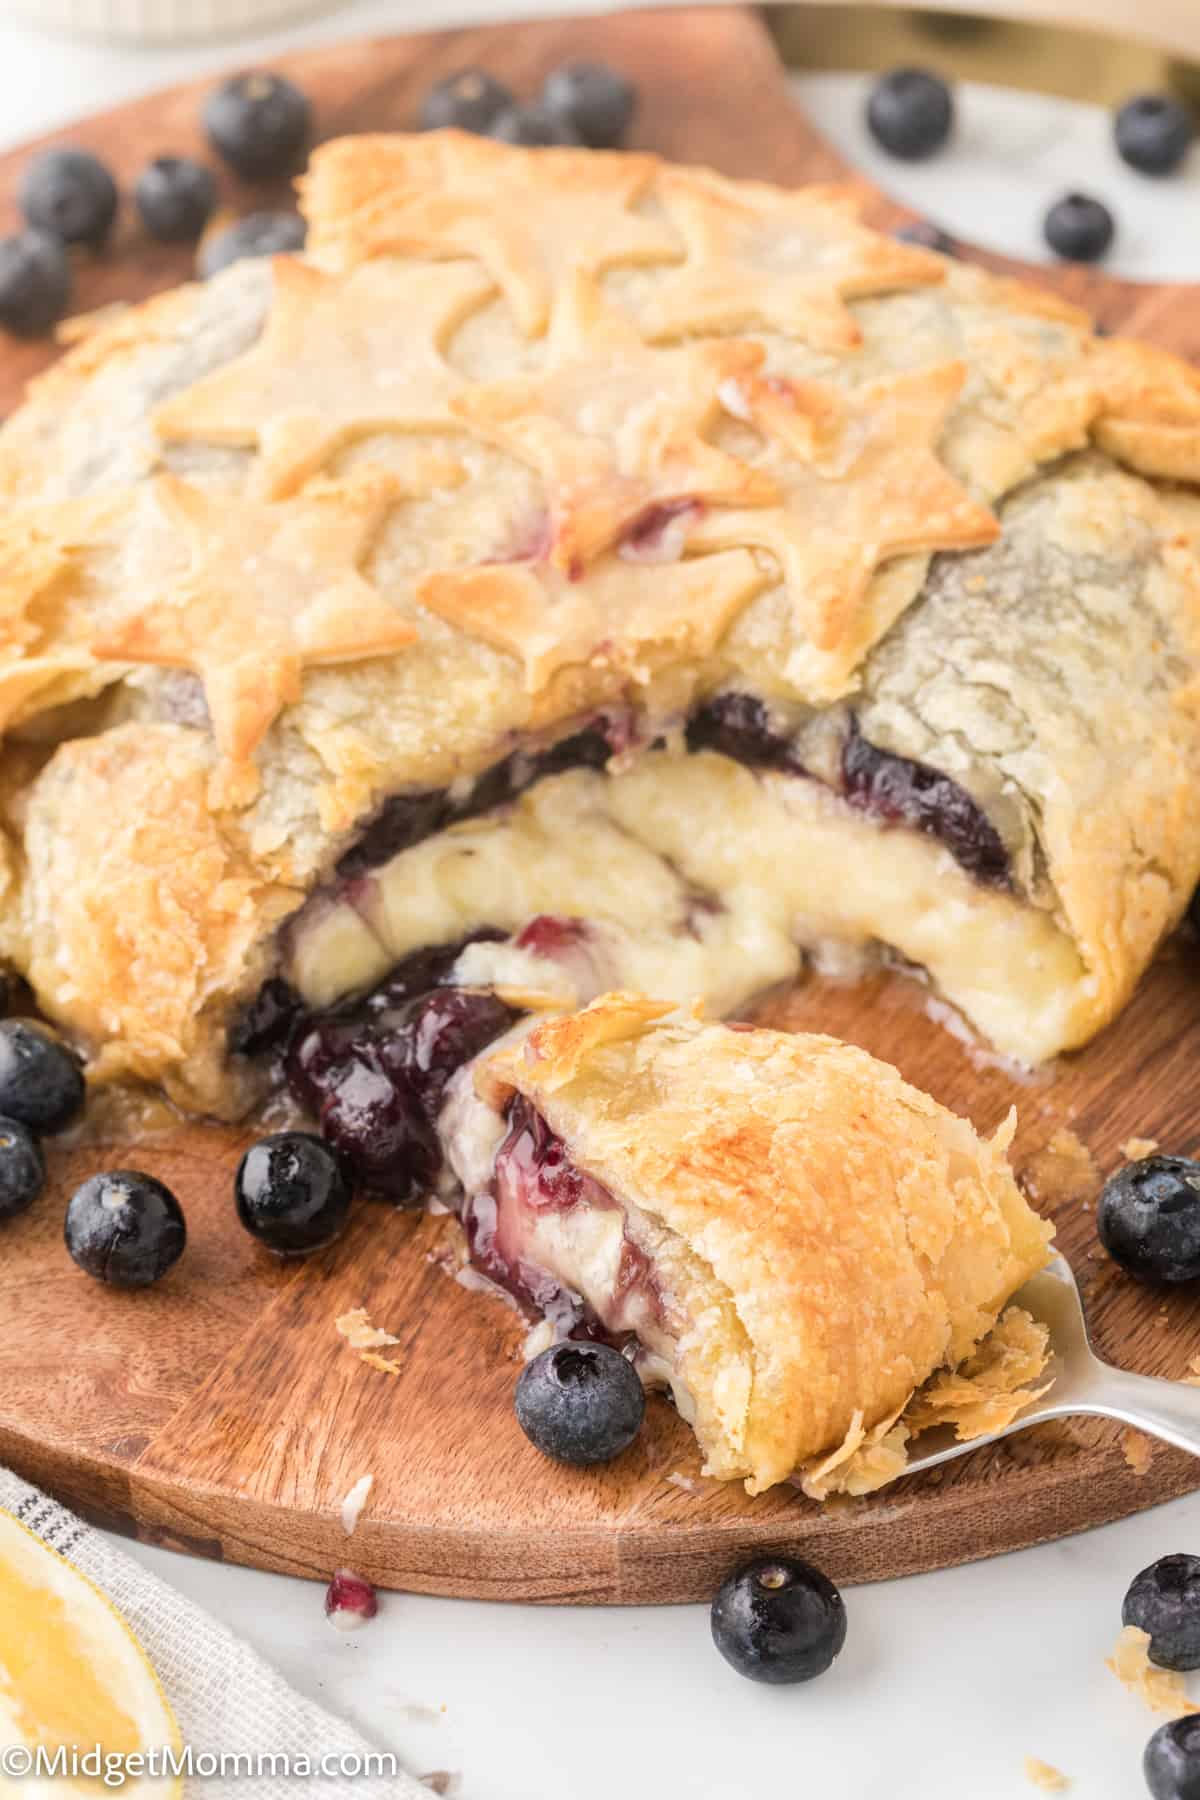 Baked Brie in Puff Pastry with Blueberry Pie Filling